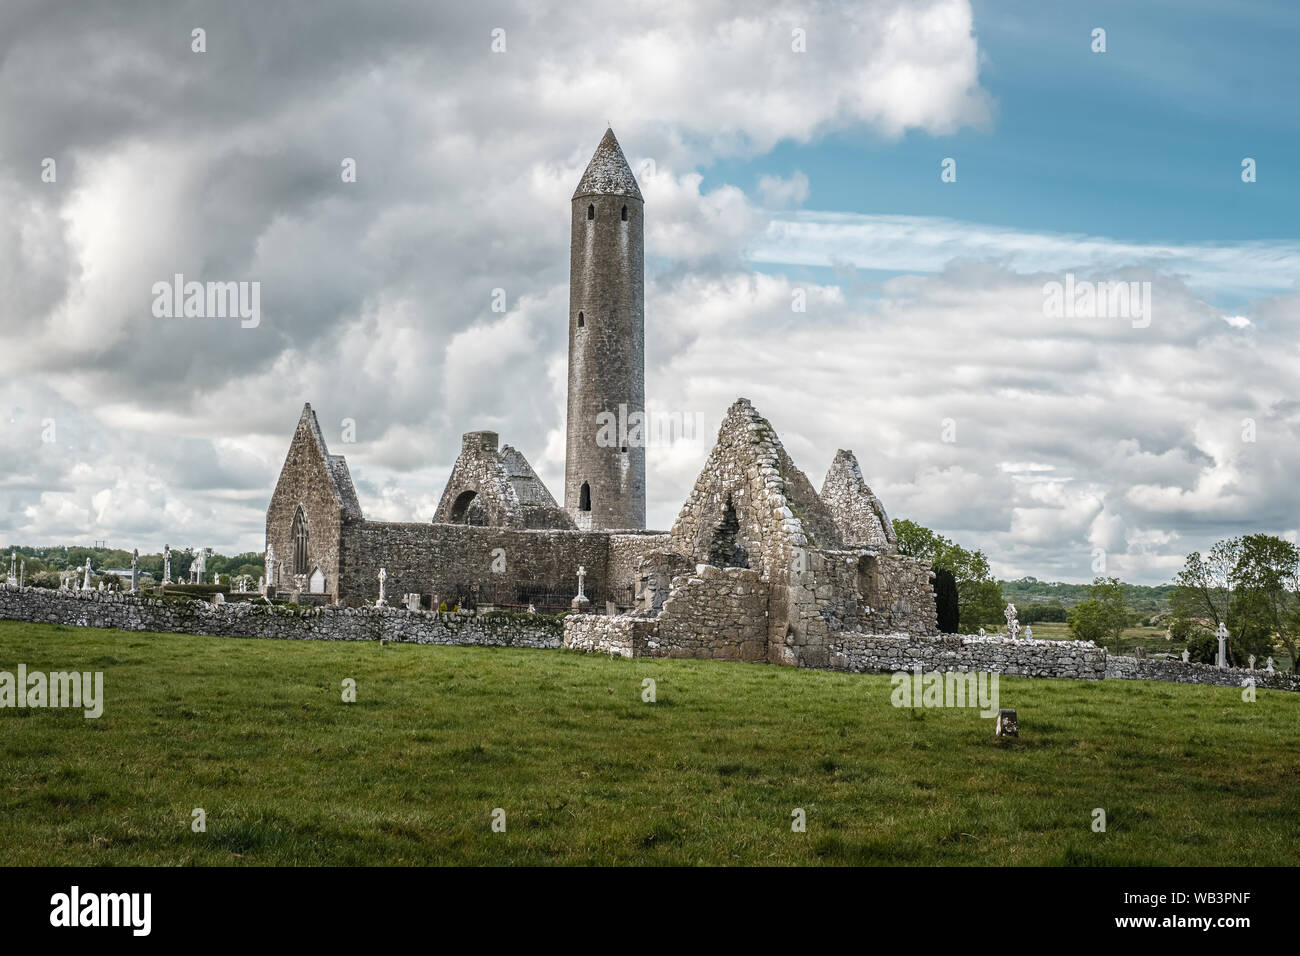 Kilmacduagh Monastery, Nr Gort, County Galway, Ireland - 20th May 2019. The Cathedral and Circular Tower built as a refuge for monks in the 12th centu Stock Photo